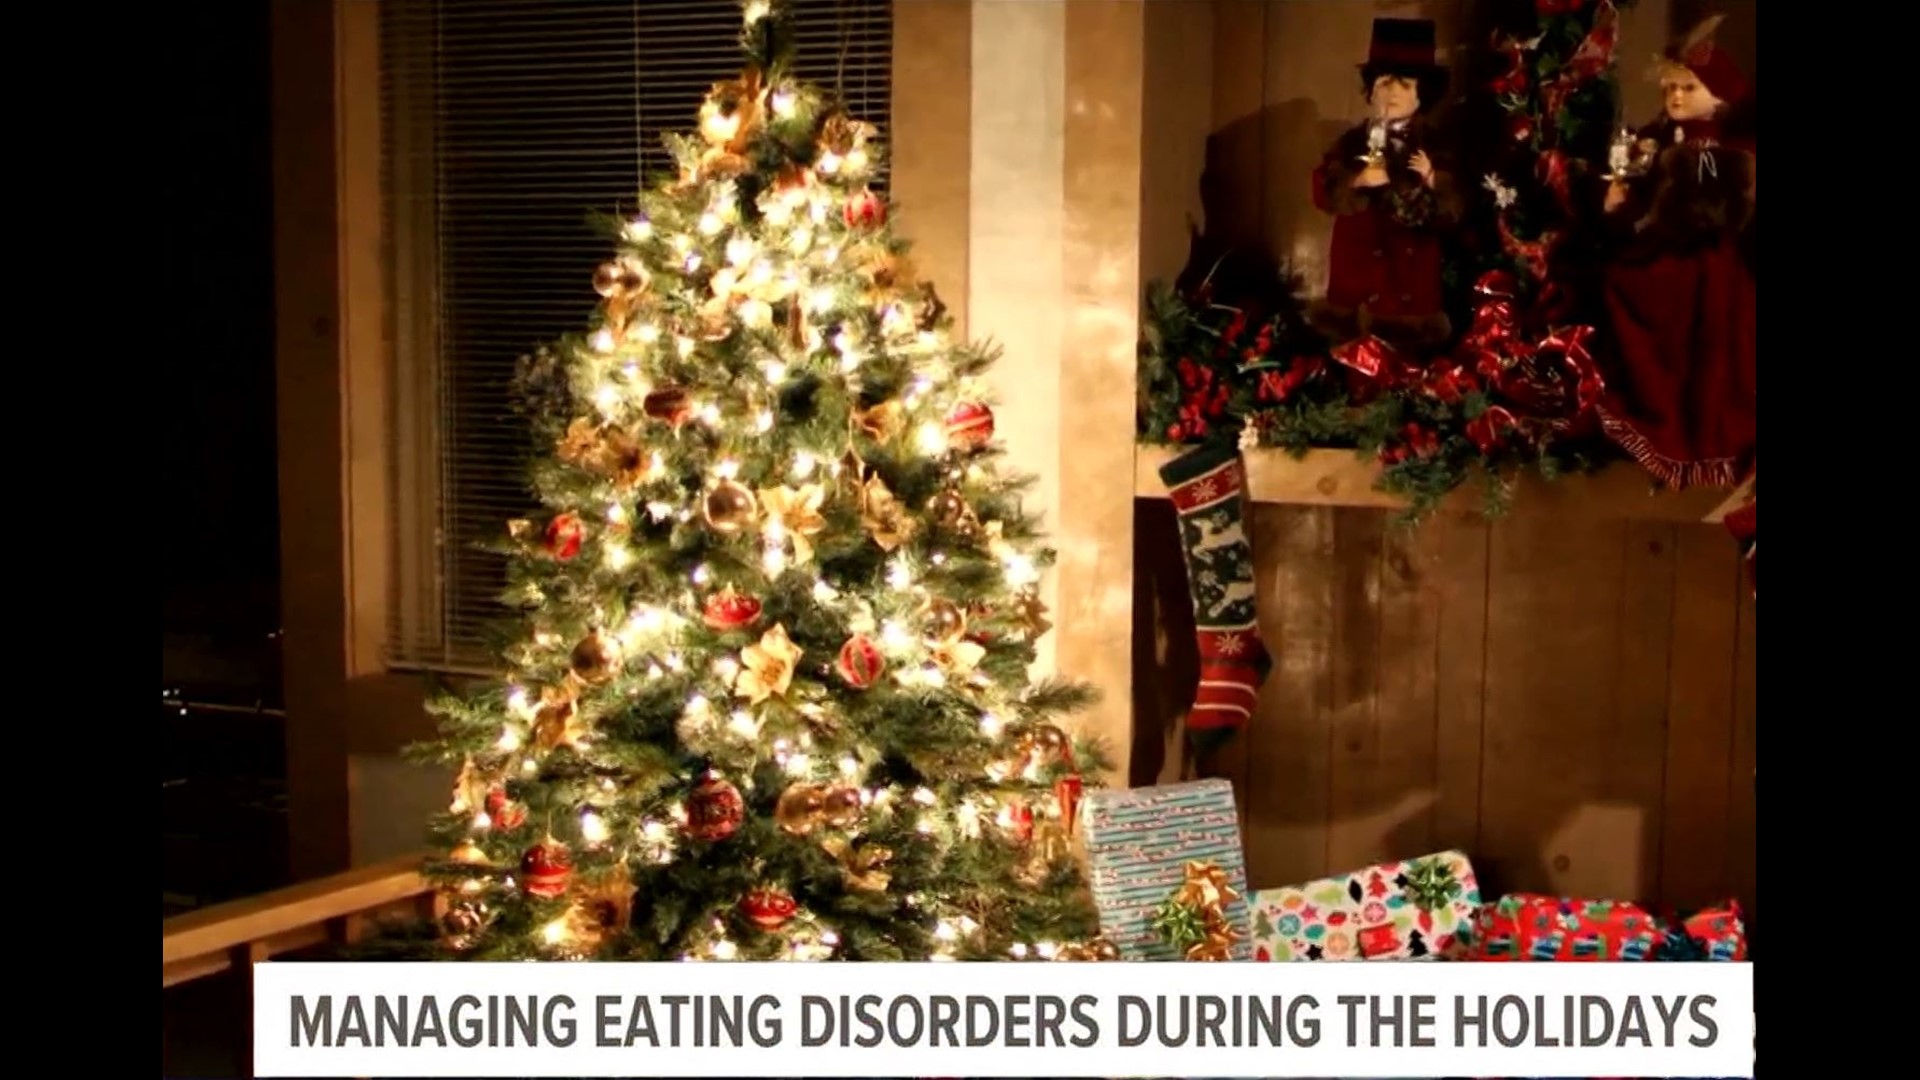 The holidays are known for two things; gifts and food, but for those who suffer from eating disorders, this time can be especially tough.